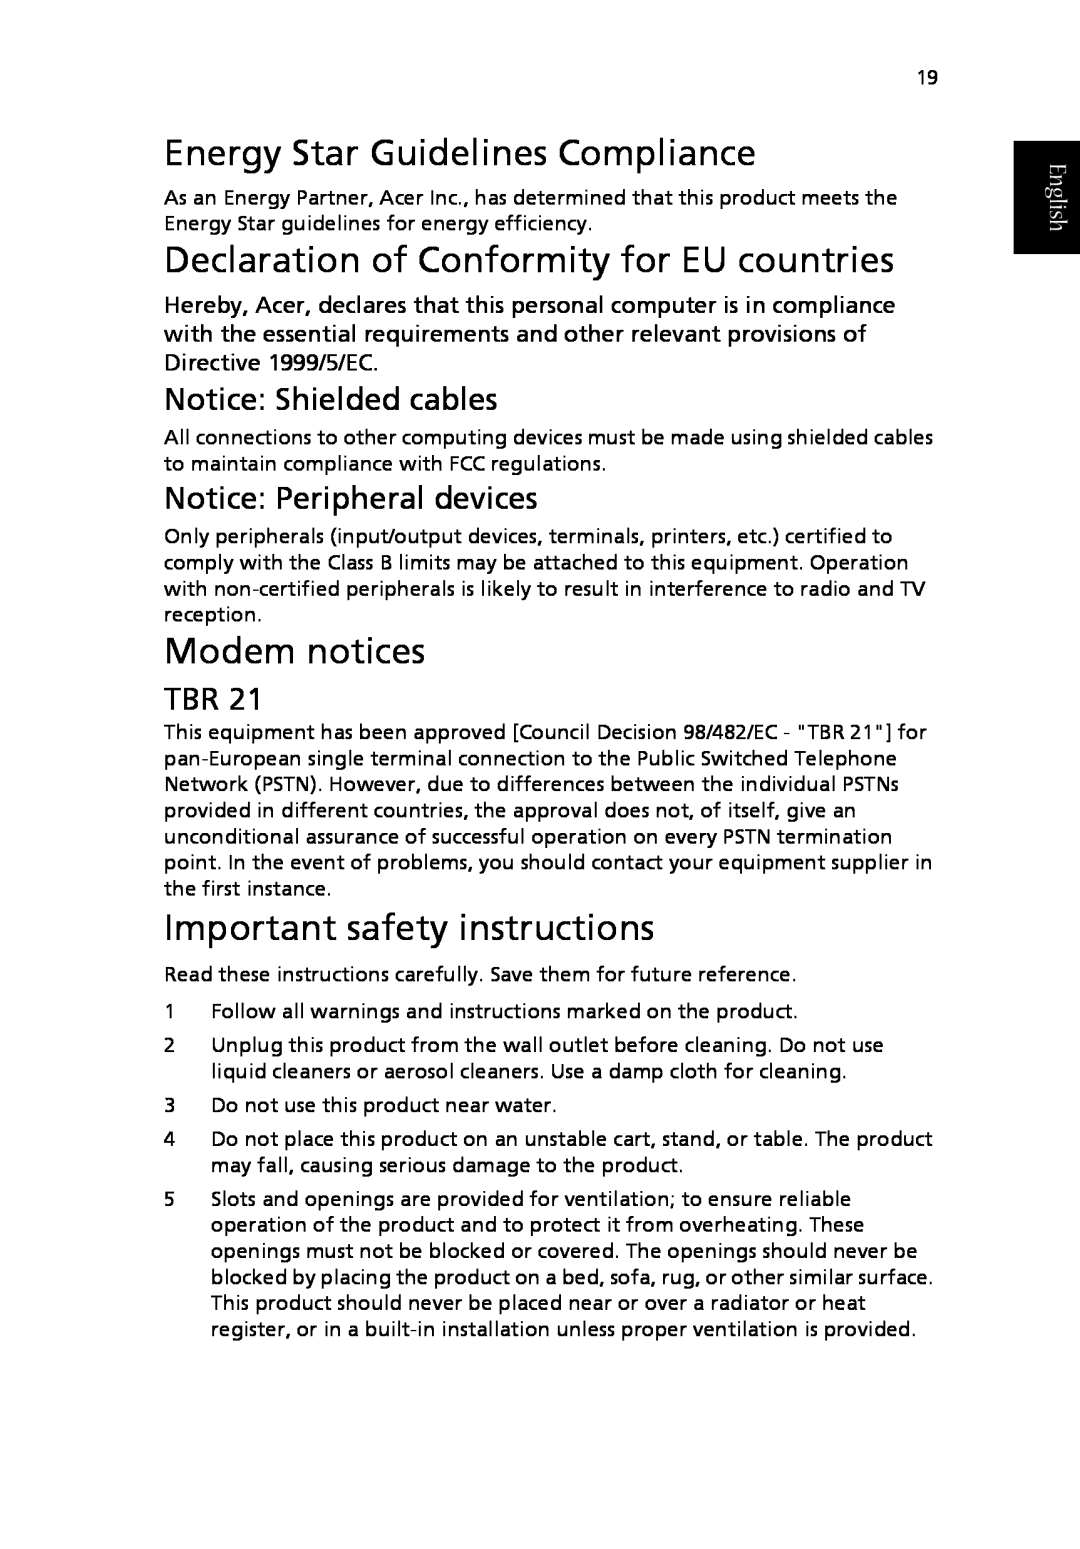 Acer T650A manual Energy Star Guidelines Compliance, Declaration of Conformity for EU countries, Modem notices, English 